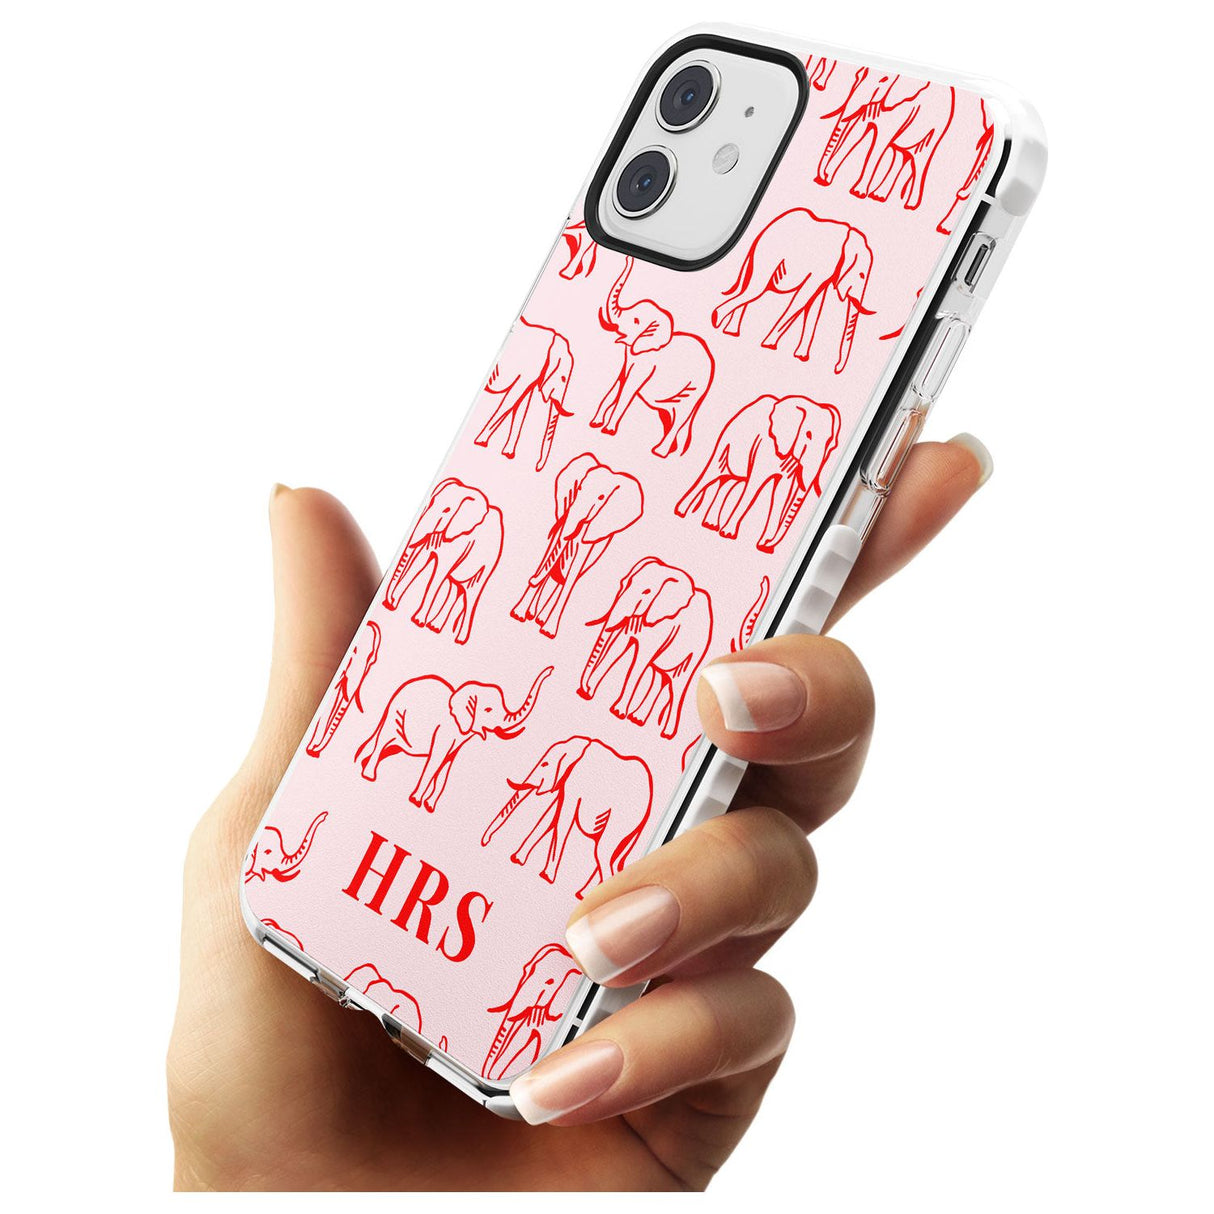 Personalised Red Elephant Outlines on Pink Impact Phone Case for iPhone 11